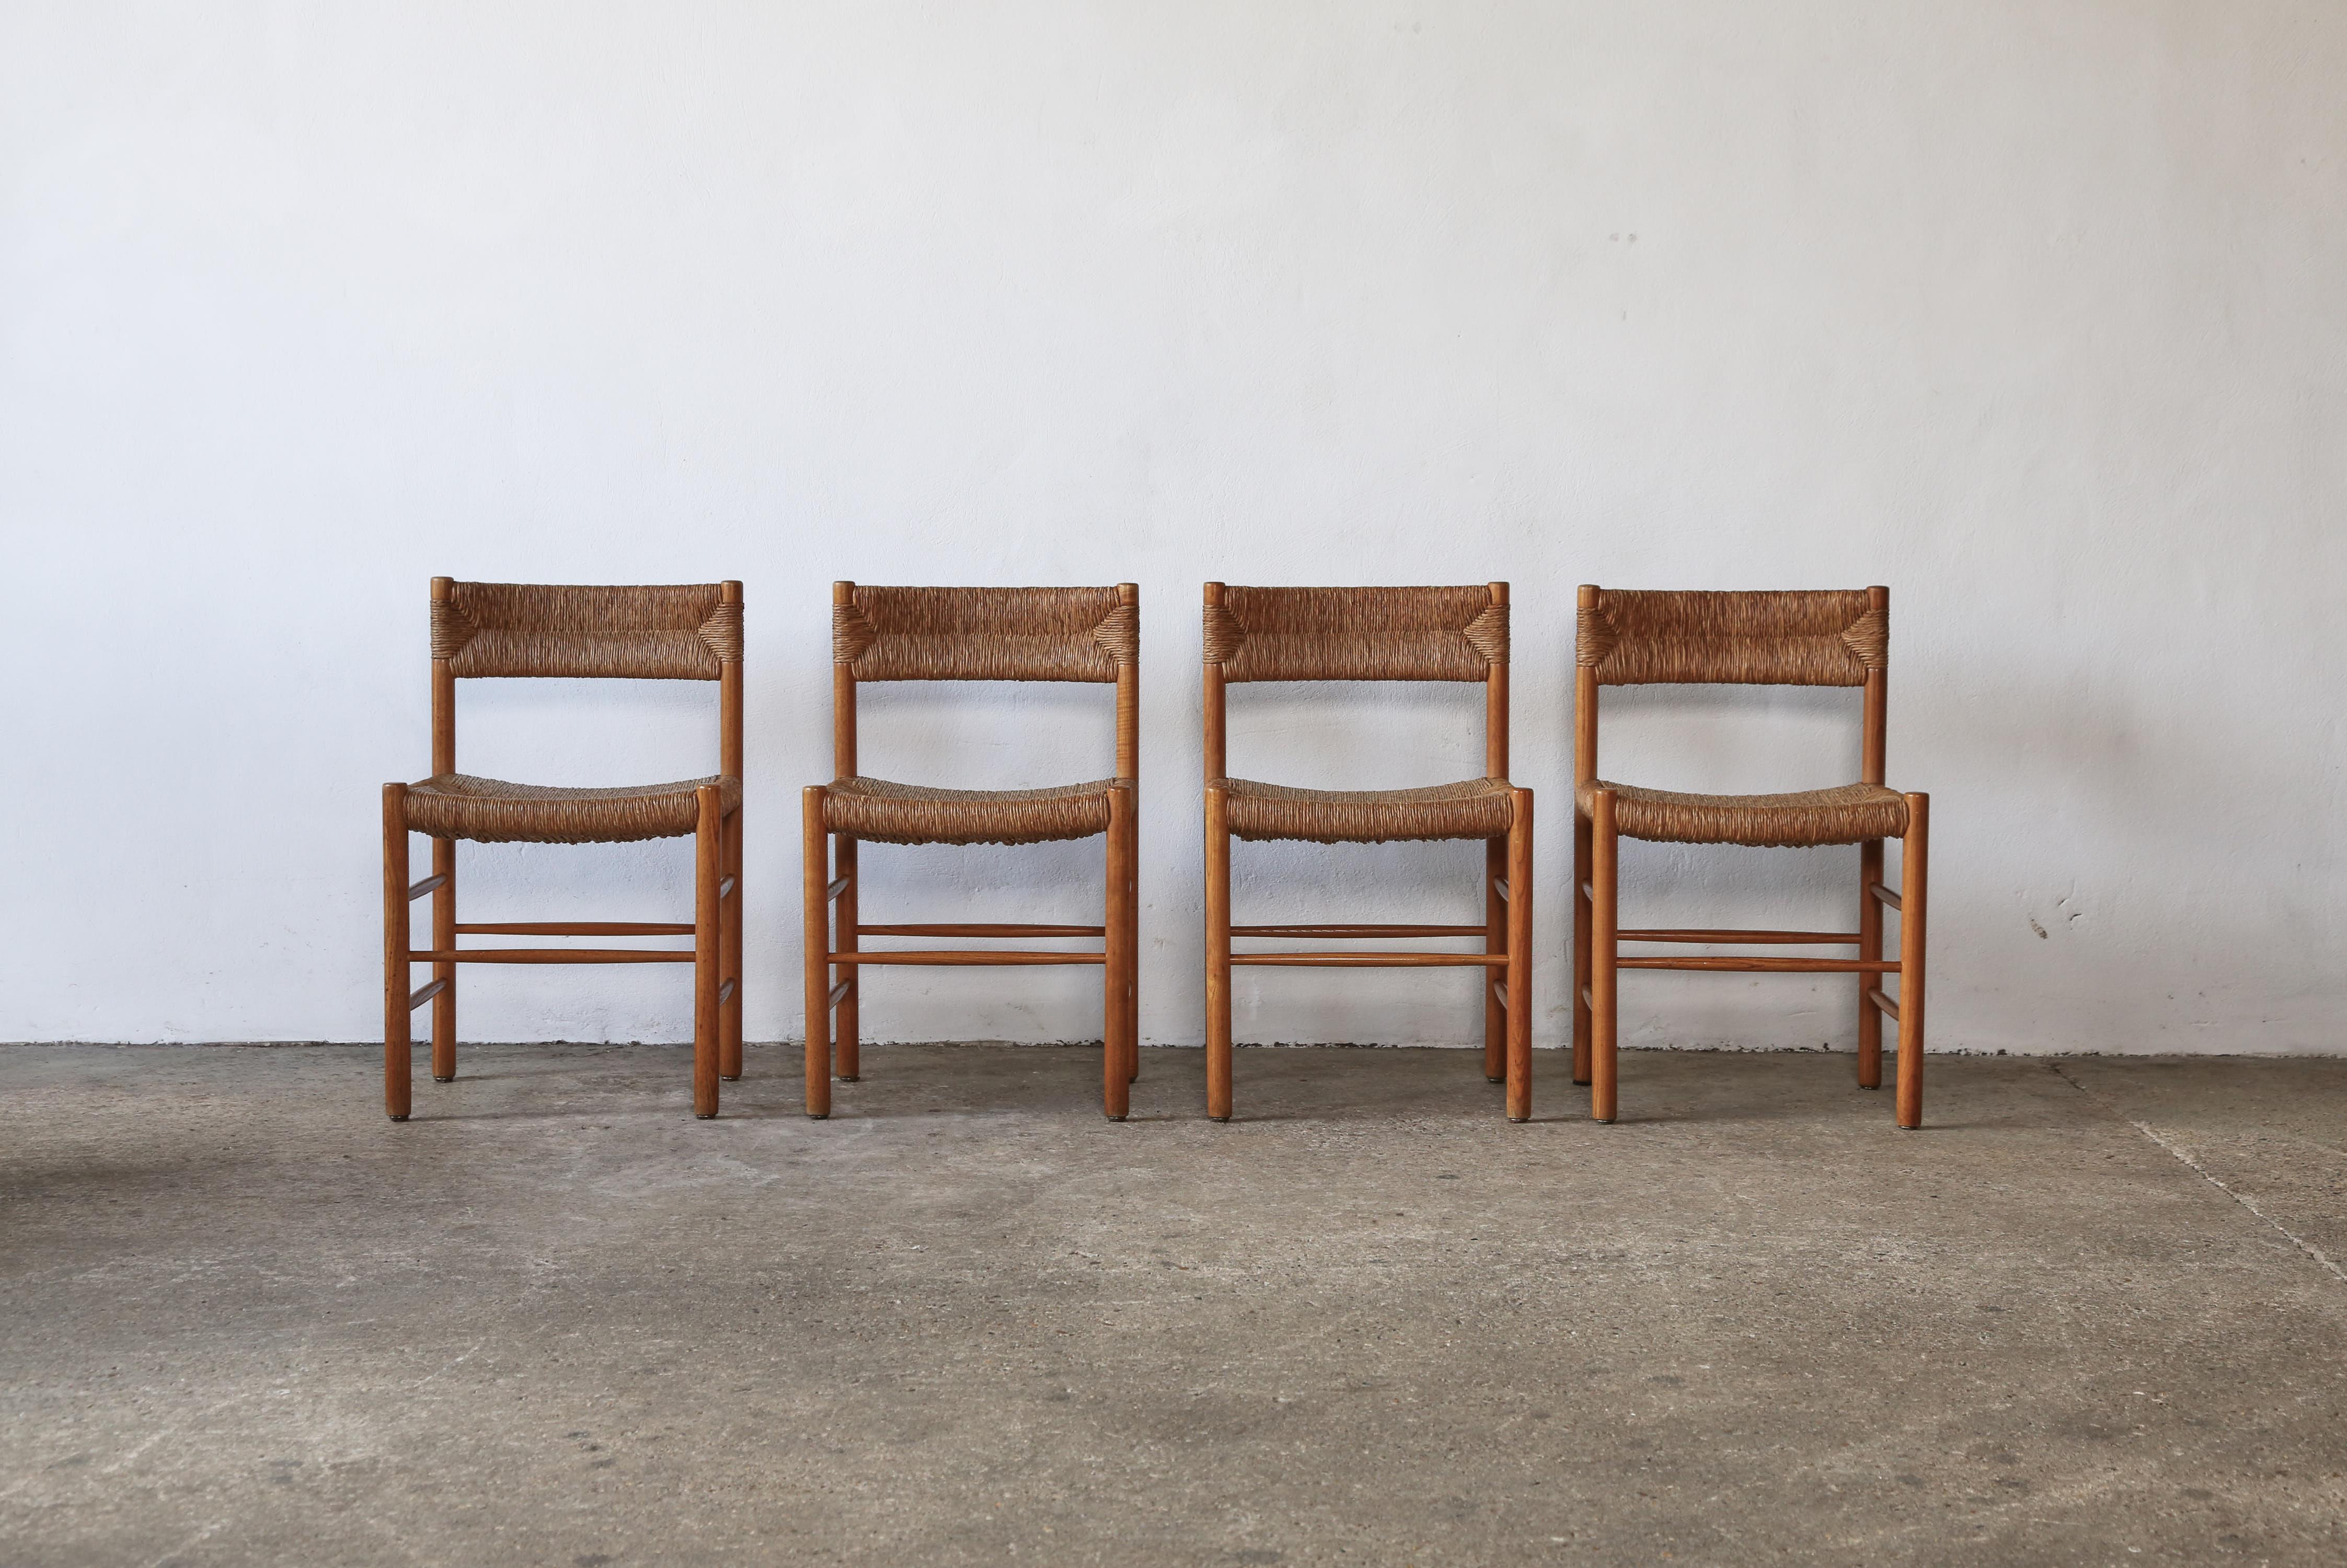 A set of four original Charlotte Perriand / Robert Sentou Dordogne chairs, France, 1960s. Original rush seats and backs in very good condition.  Rarely found in such great original condition as a set of 4. Fast shipping worldwide.
